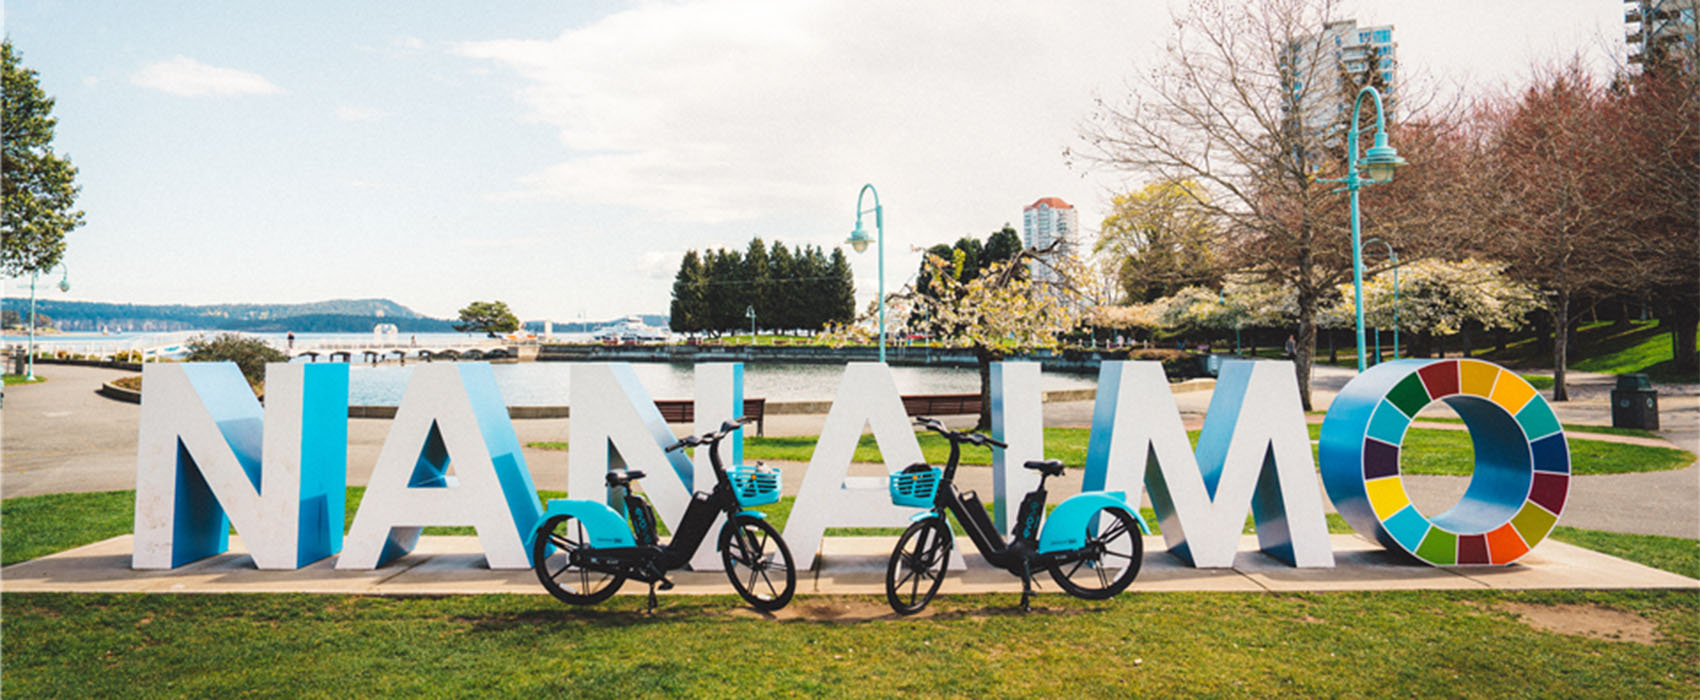 Evolve e-bikes parked in front of the Nanaimo park sign